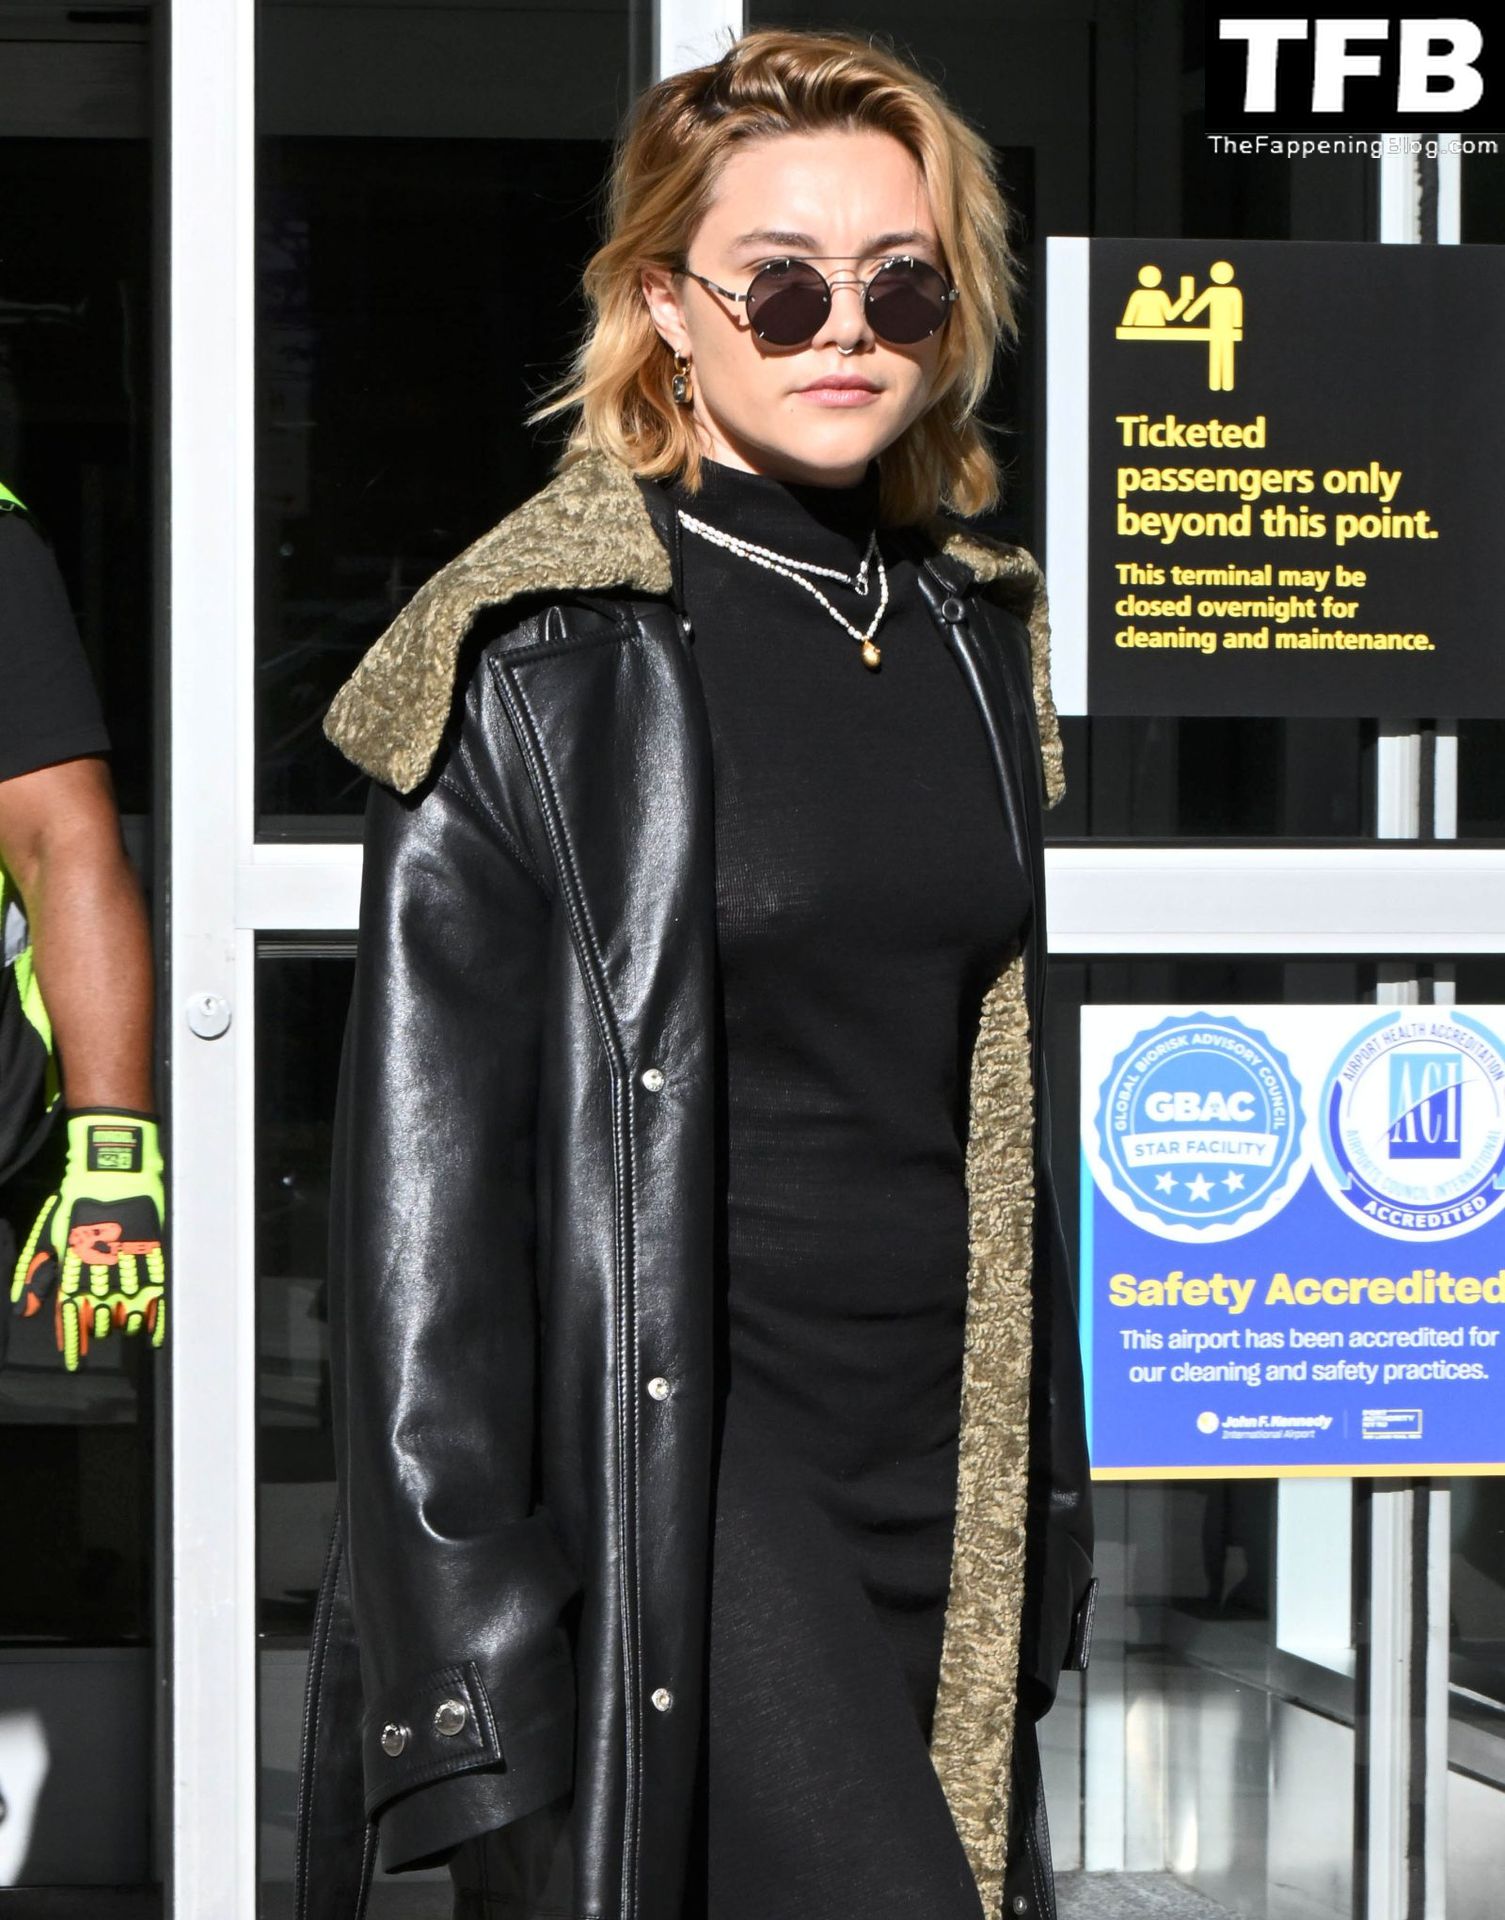 Florence Pugh Pokies The Fappening Blog 28 - Florence Pugh Shows Off Her Pokies at JFK airport in NYC (31 Photos)